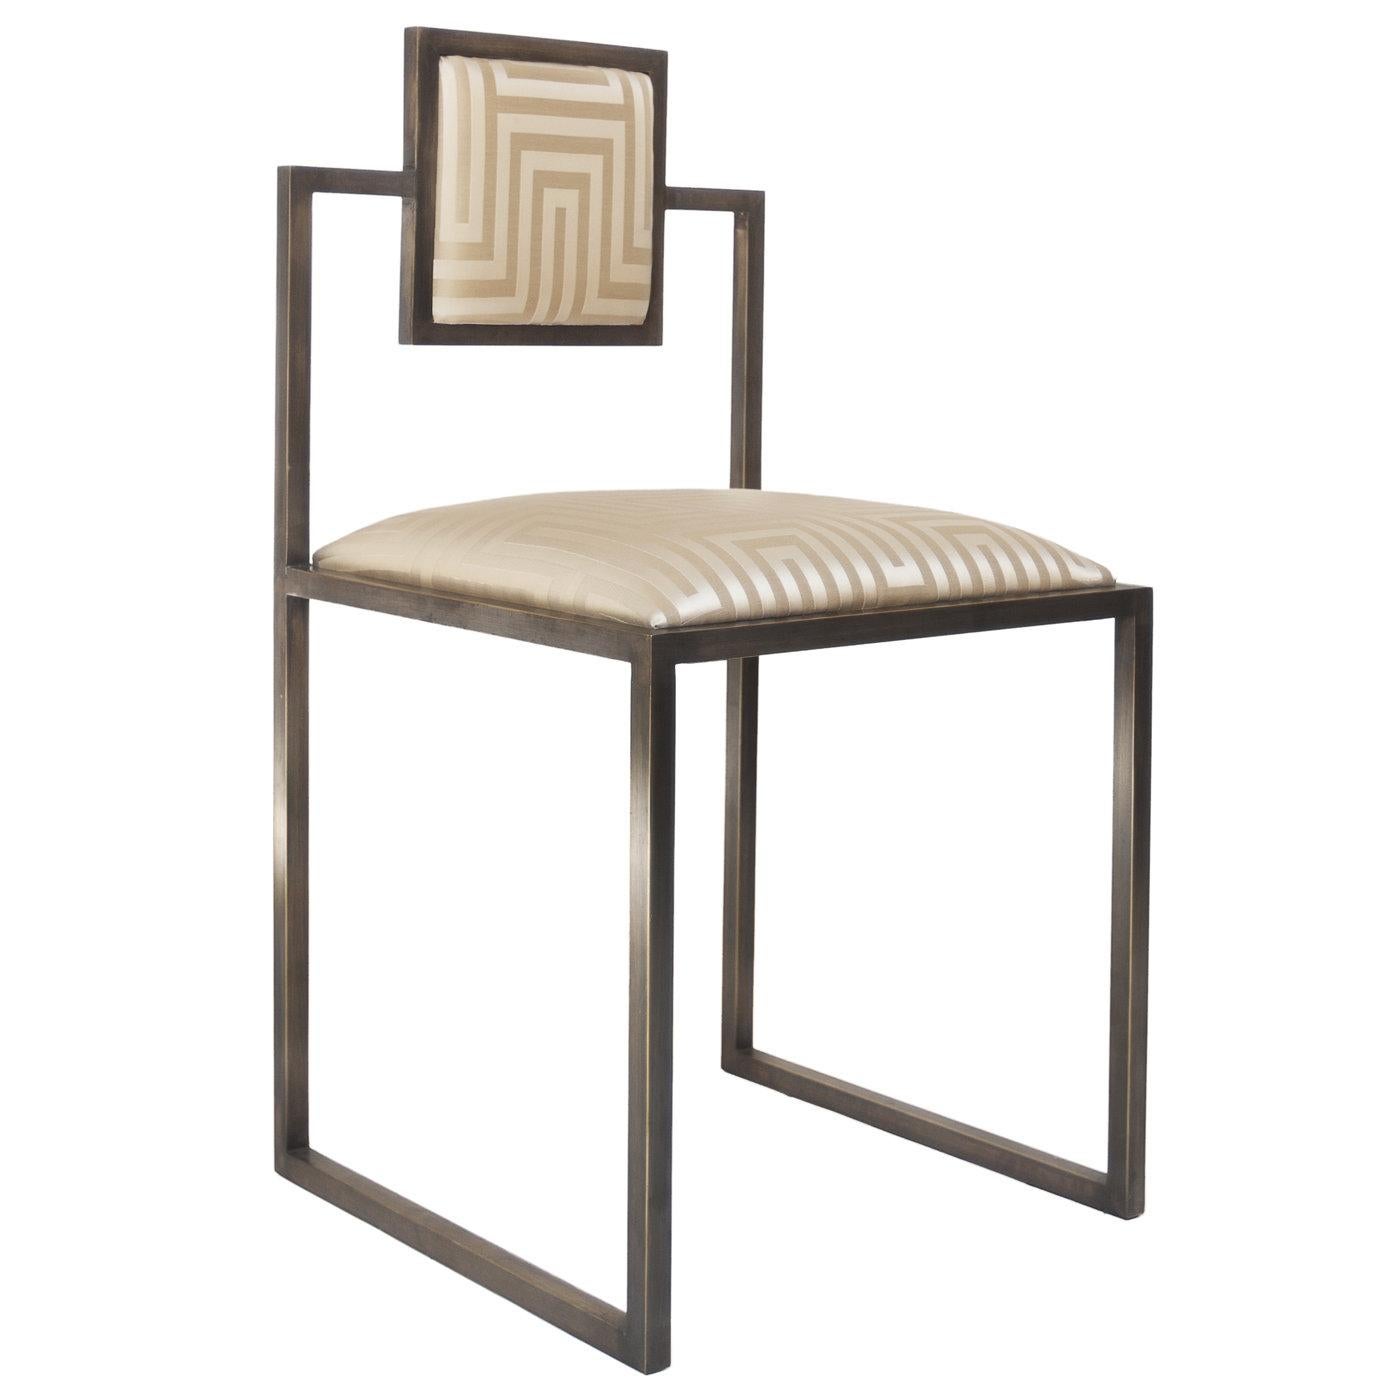 This chair is simple and square in design and features an elegant solid brass handcrafted structure. The comfortable seat and back are upholstered using only the finest fabrics. This one in particular features fabric from Dedar Milano called Dedalus